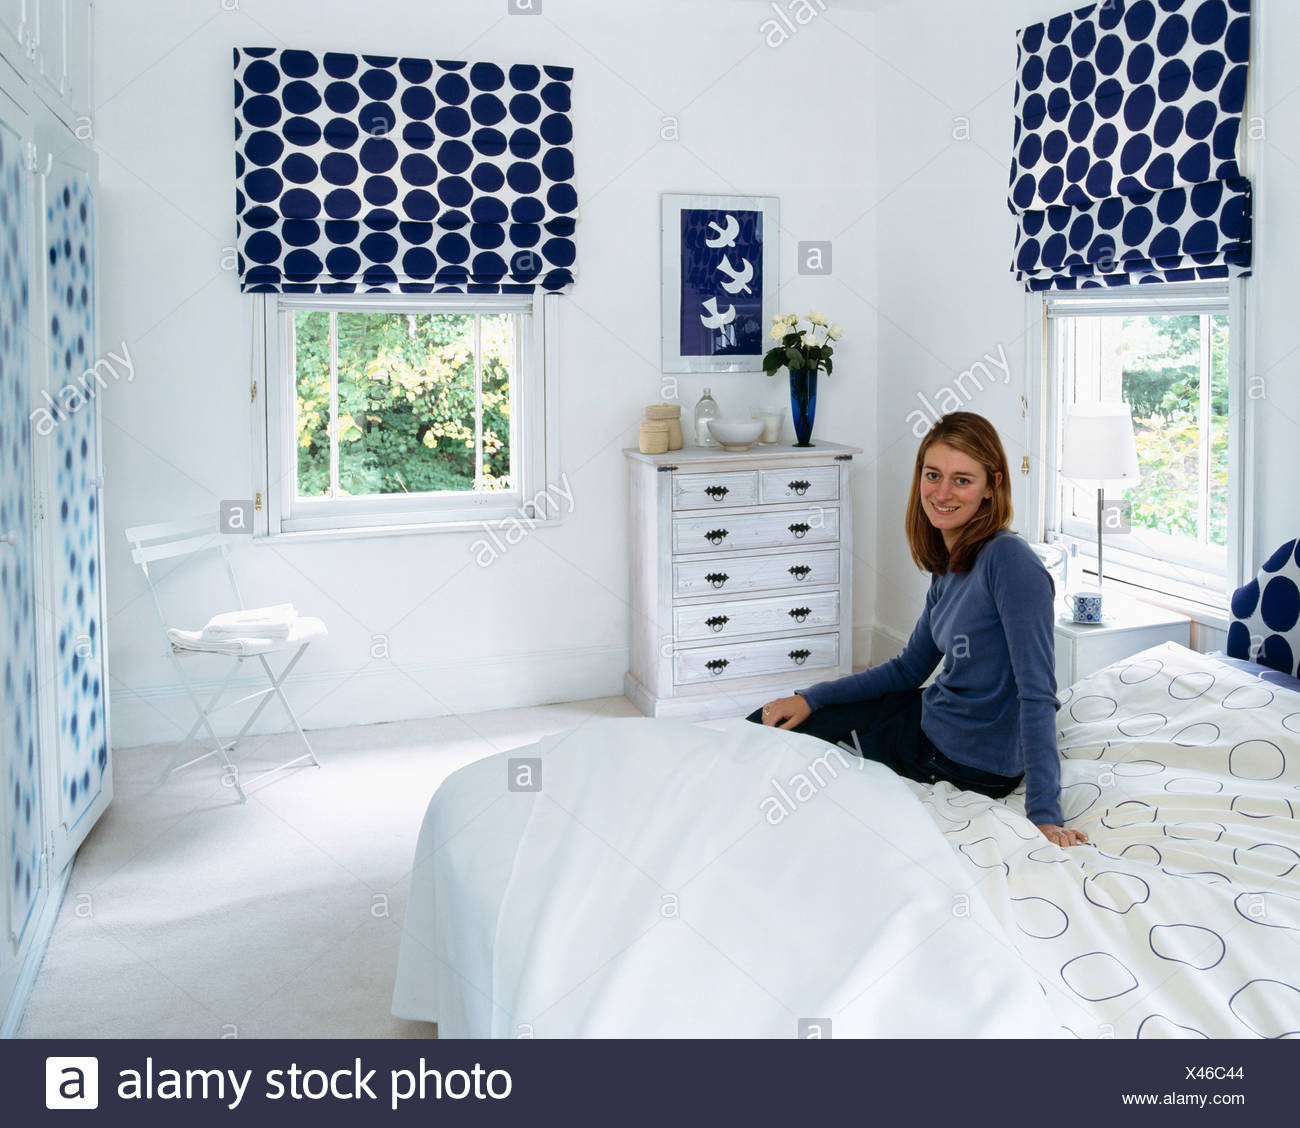 Young Woman Sitting On Bed In White Bedroom With Blue Spotted Blinds On Windows Stock Photo Alamy